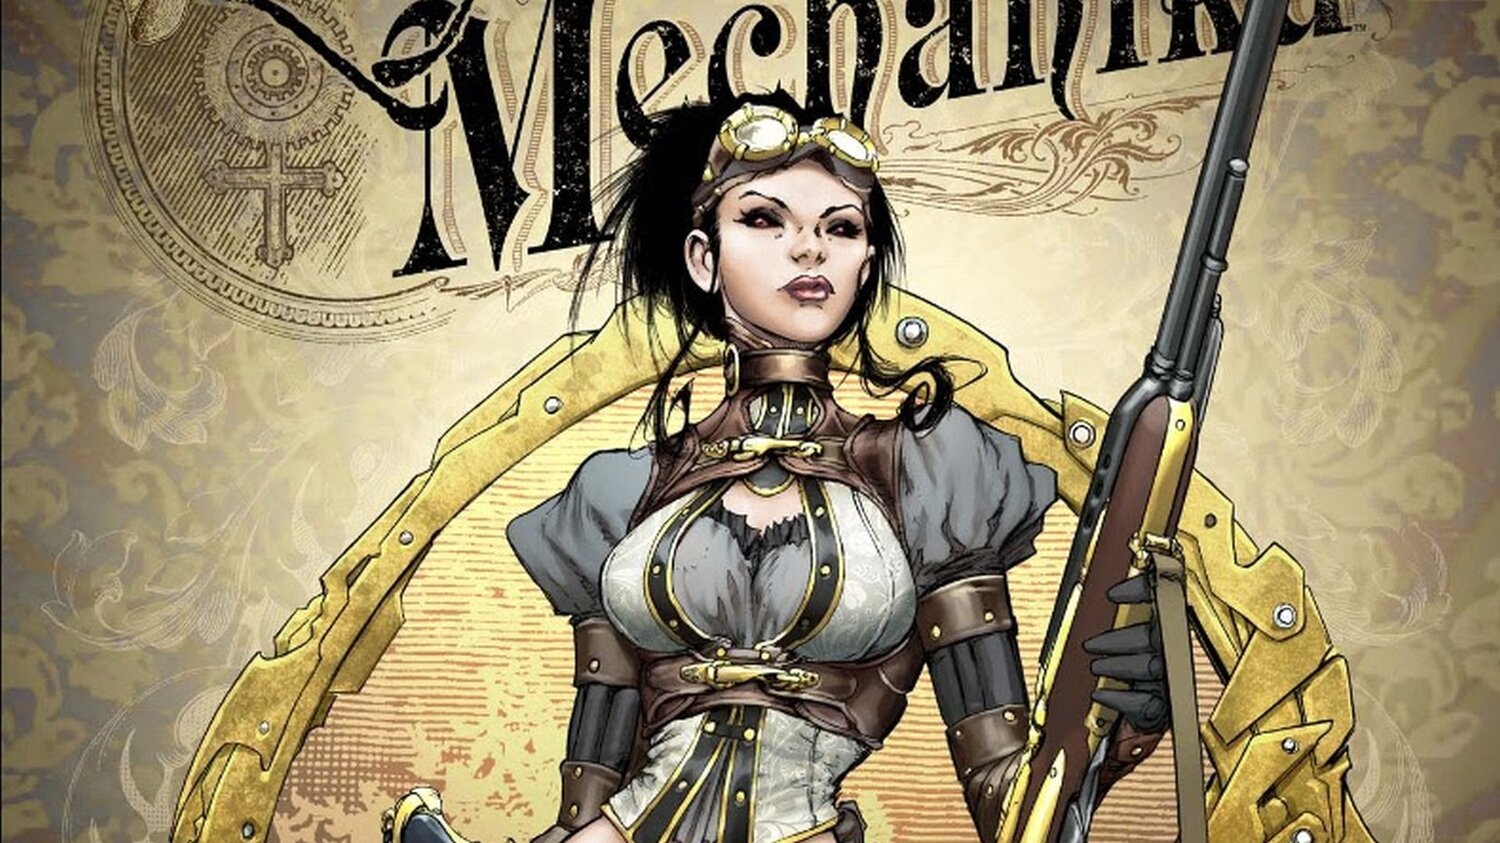 The Steampunk Adventures of LADY MECHANIKA Move to Image Comics.